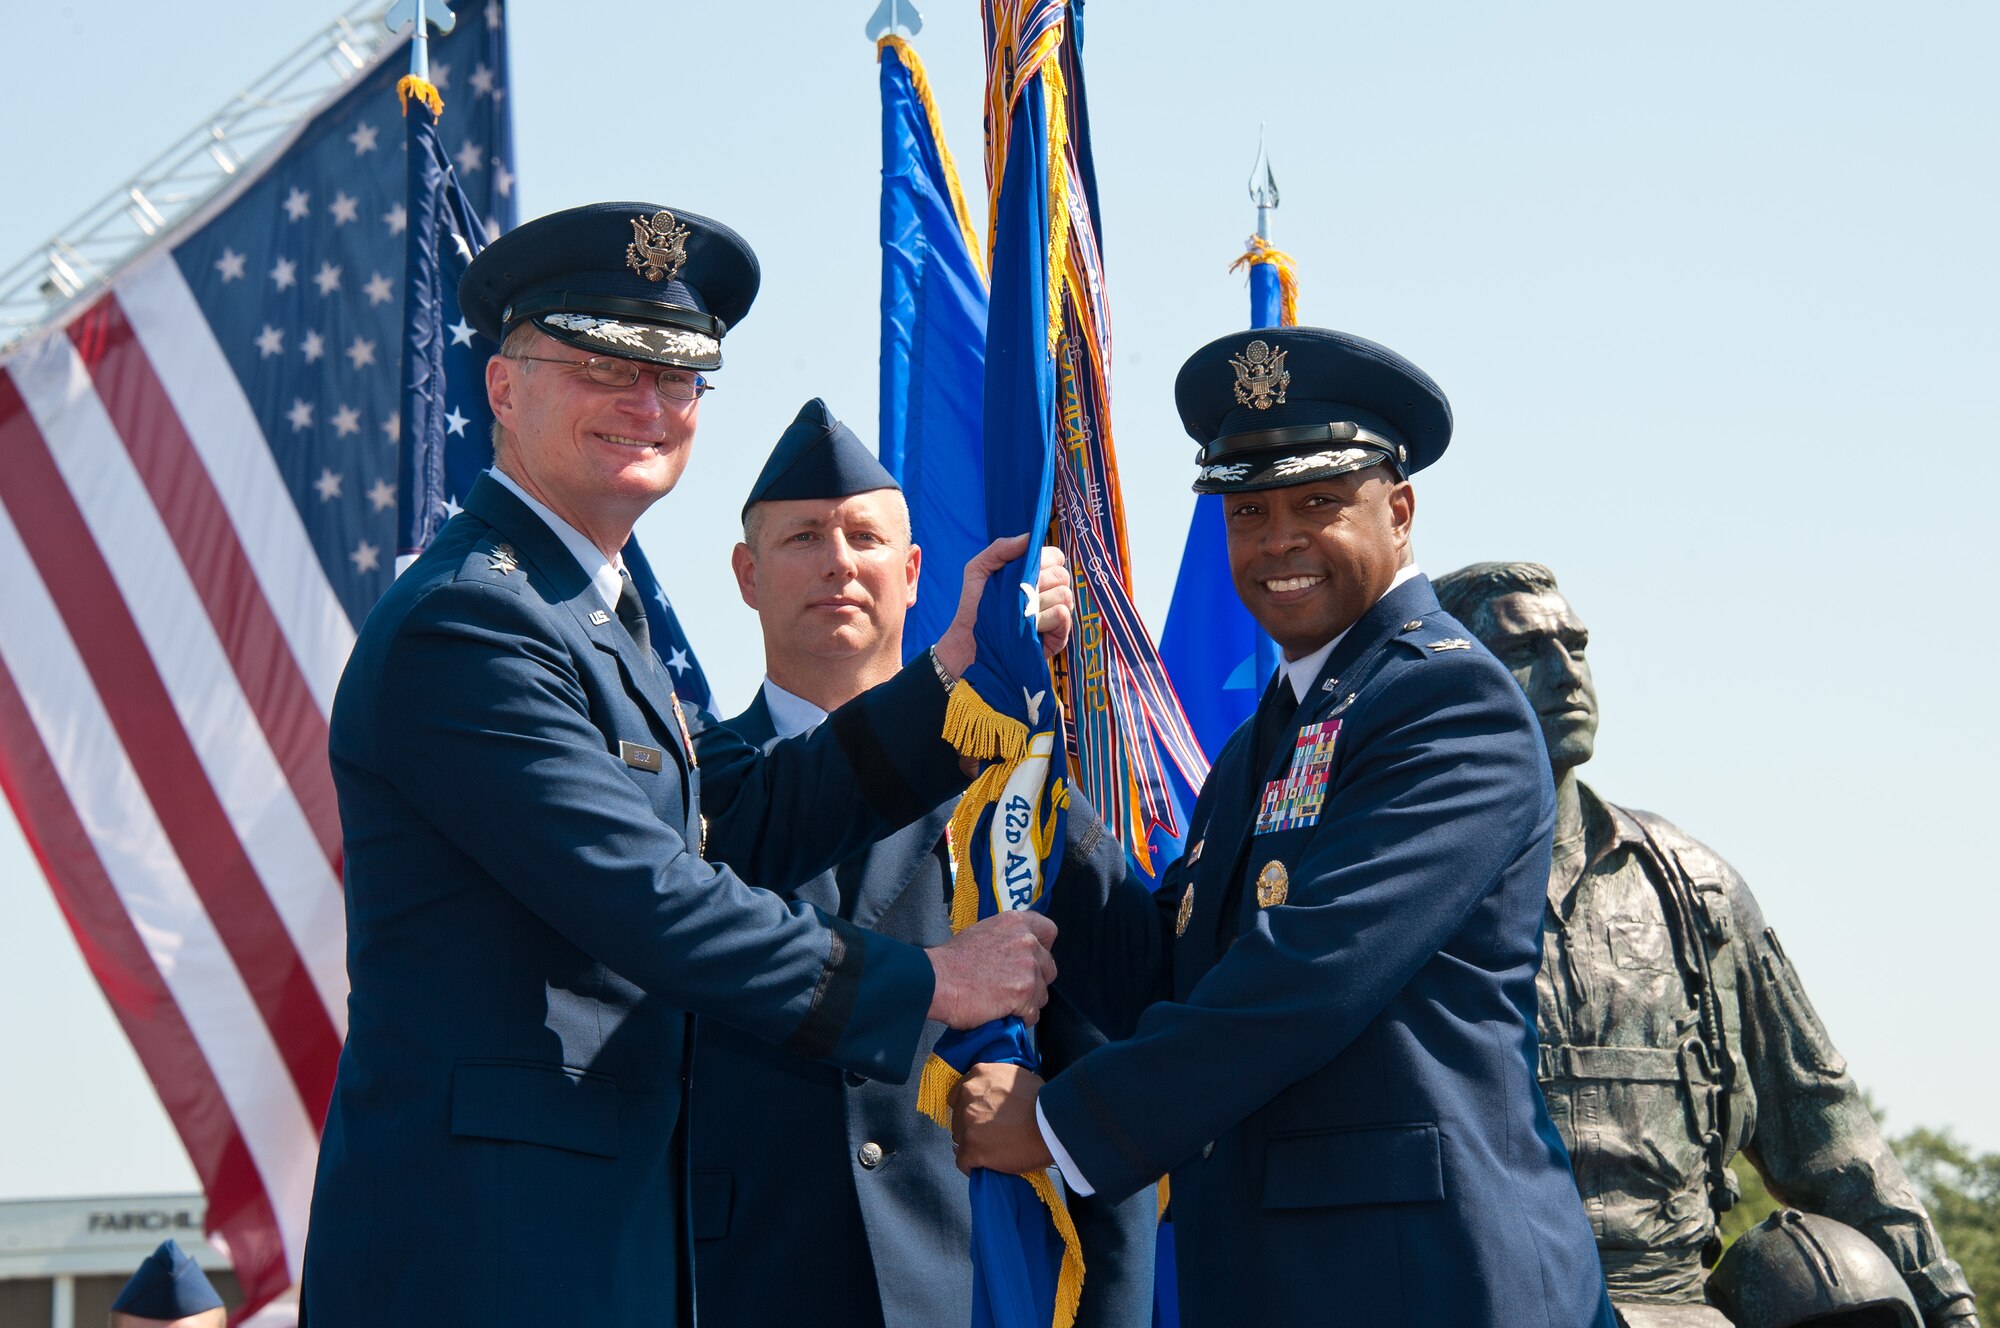 Lt. Gen. David Fadok, commander and president of the Air University passes the colors to Col. Trent Edwards as Col. Edwards assumed command of the 42nd Air Base Wing on June 28. (Air Force photo by Melanie Rodgers Cox)